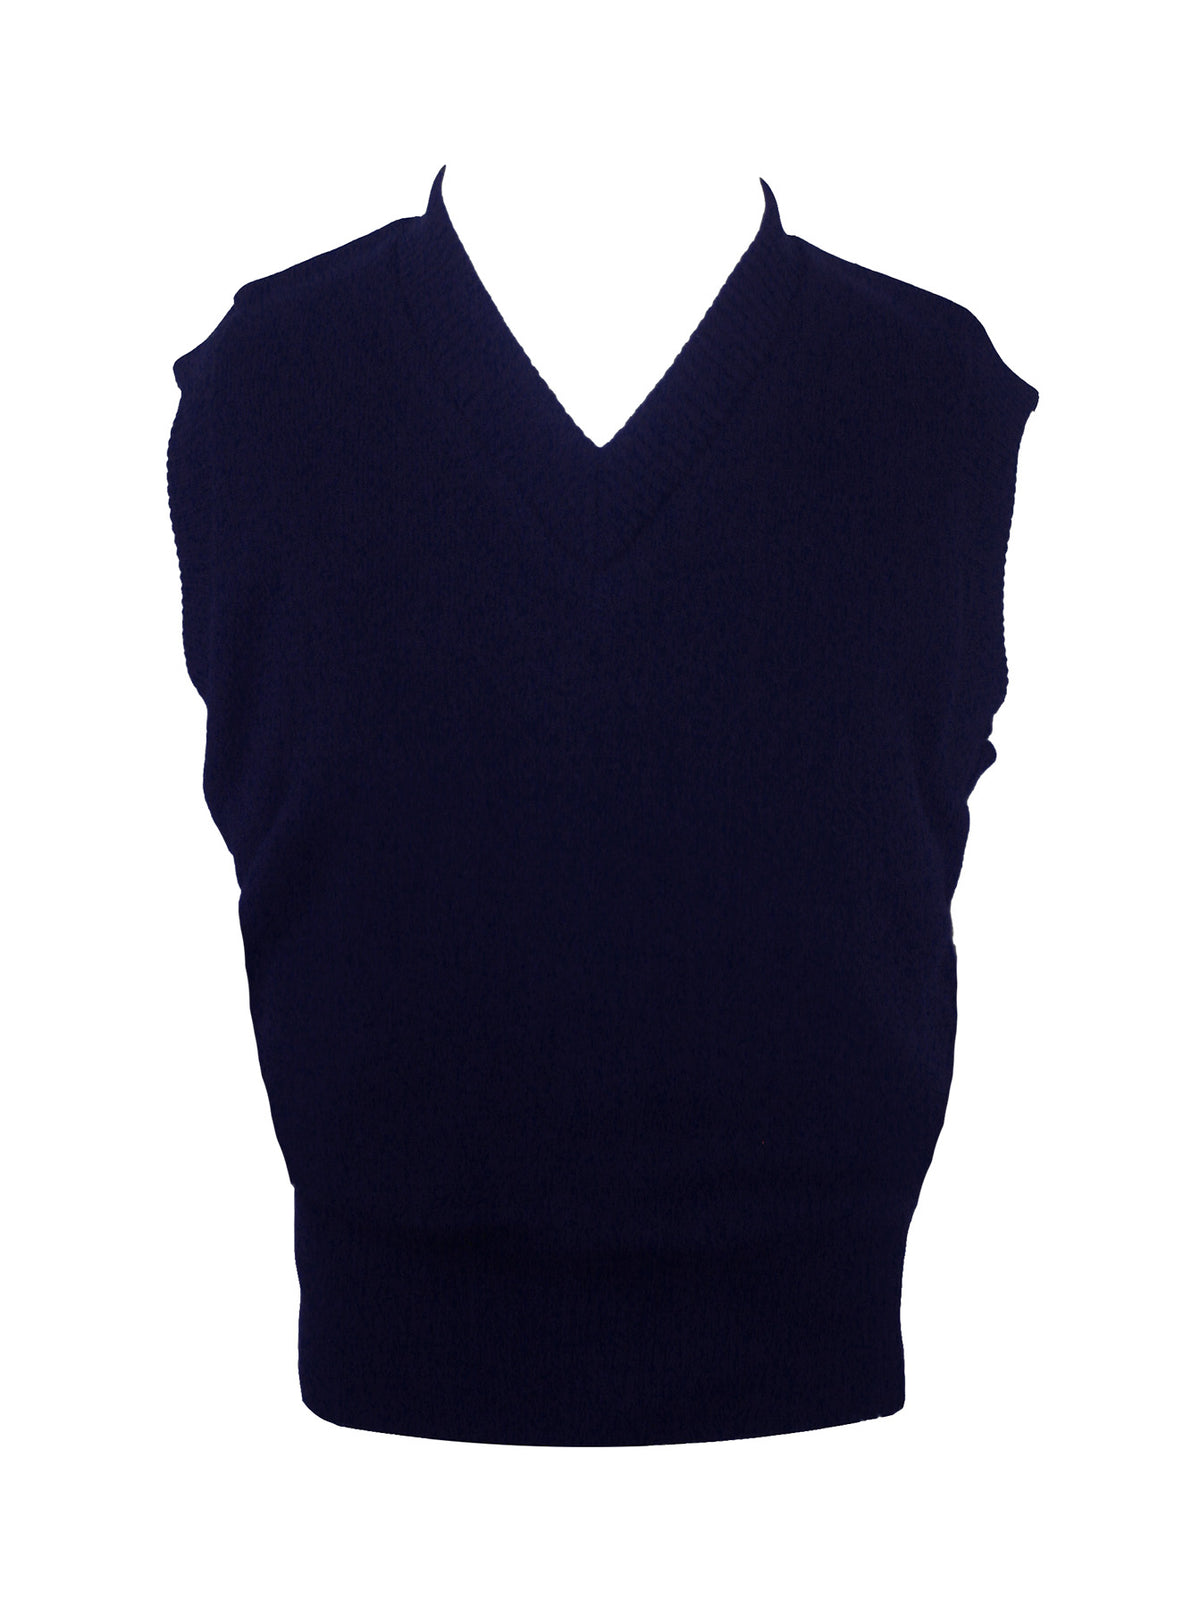 NAVY VEST, SIZE 44 AND UP